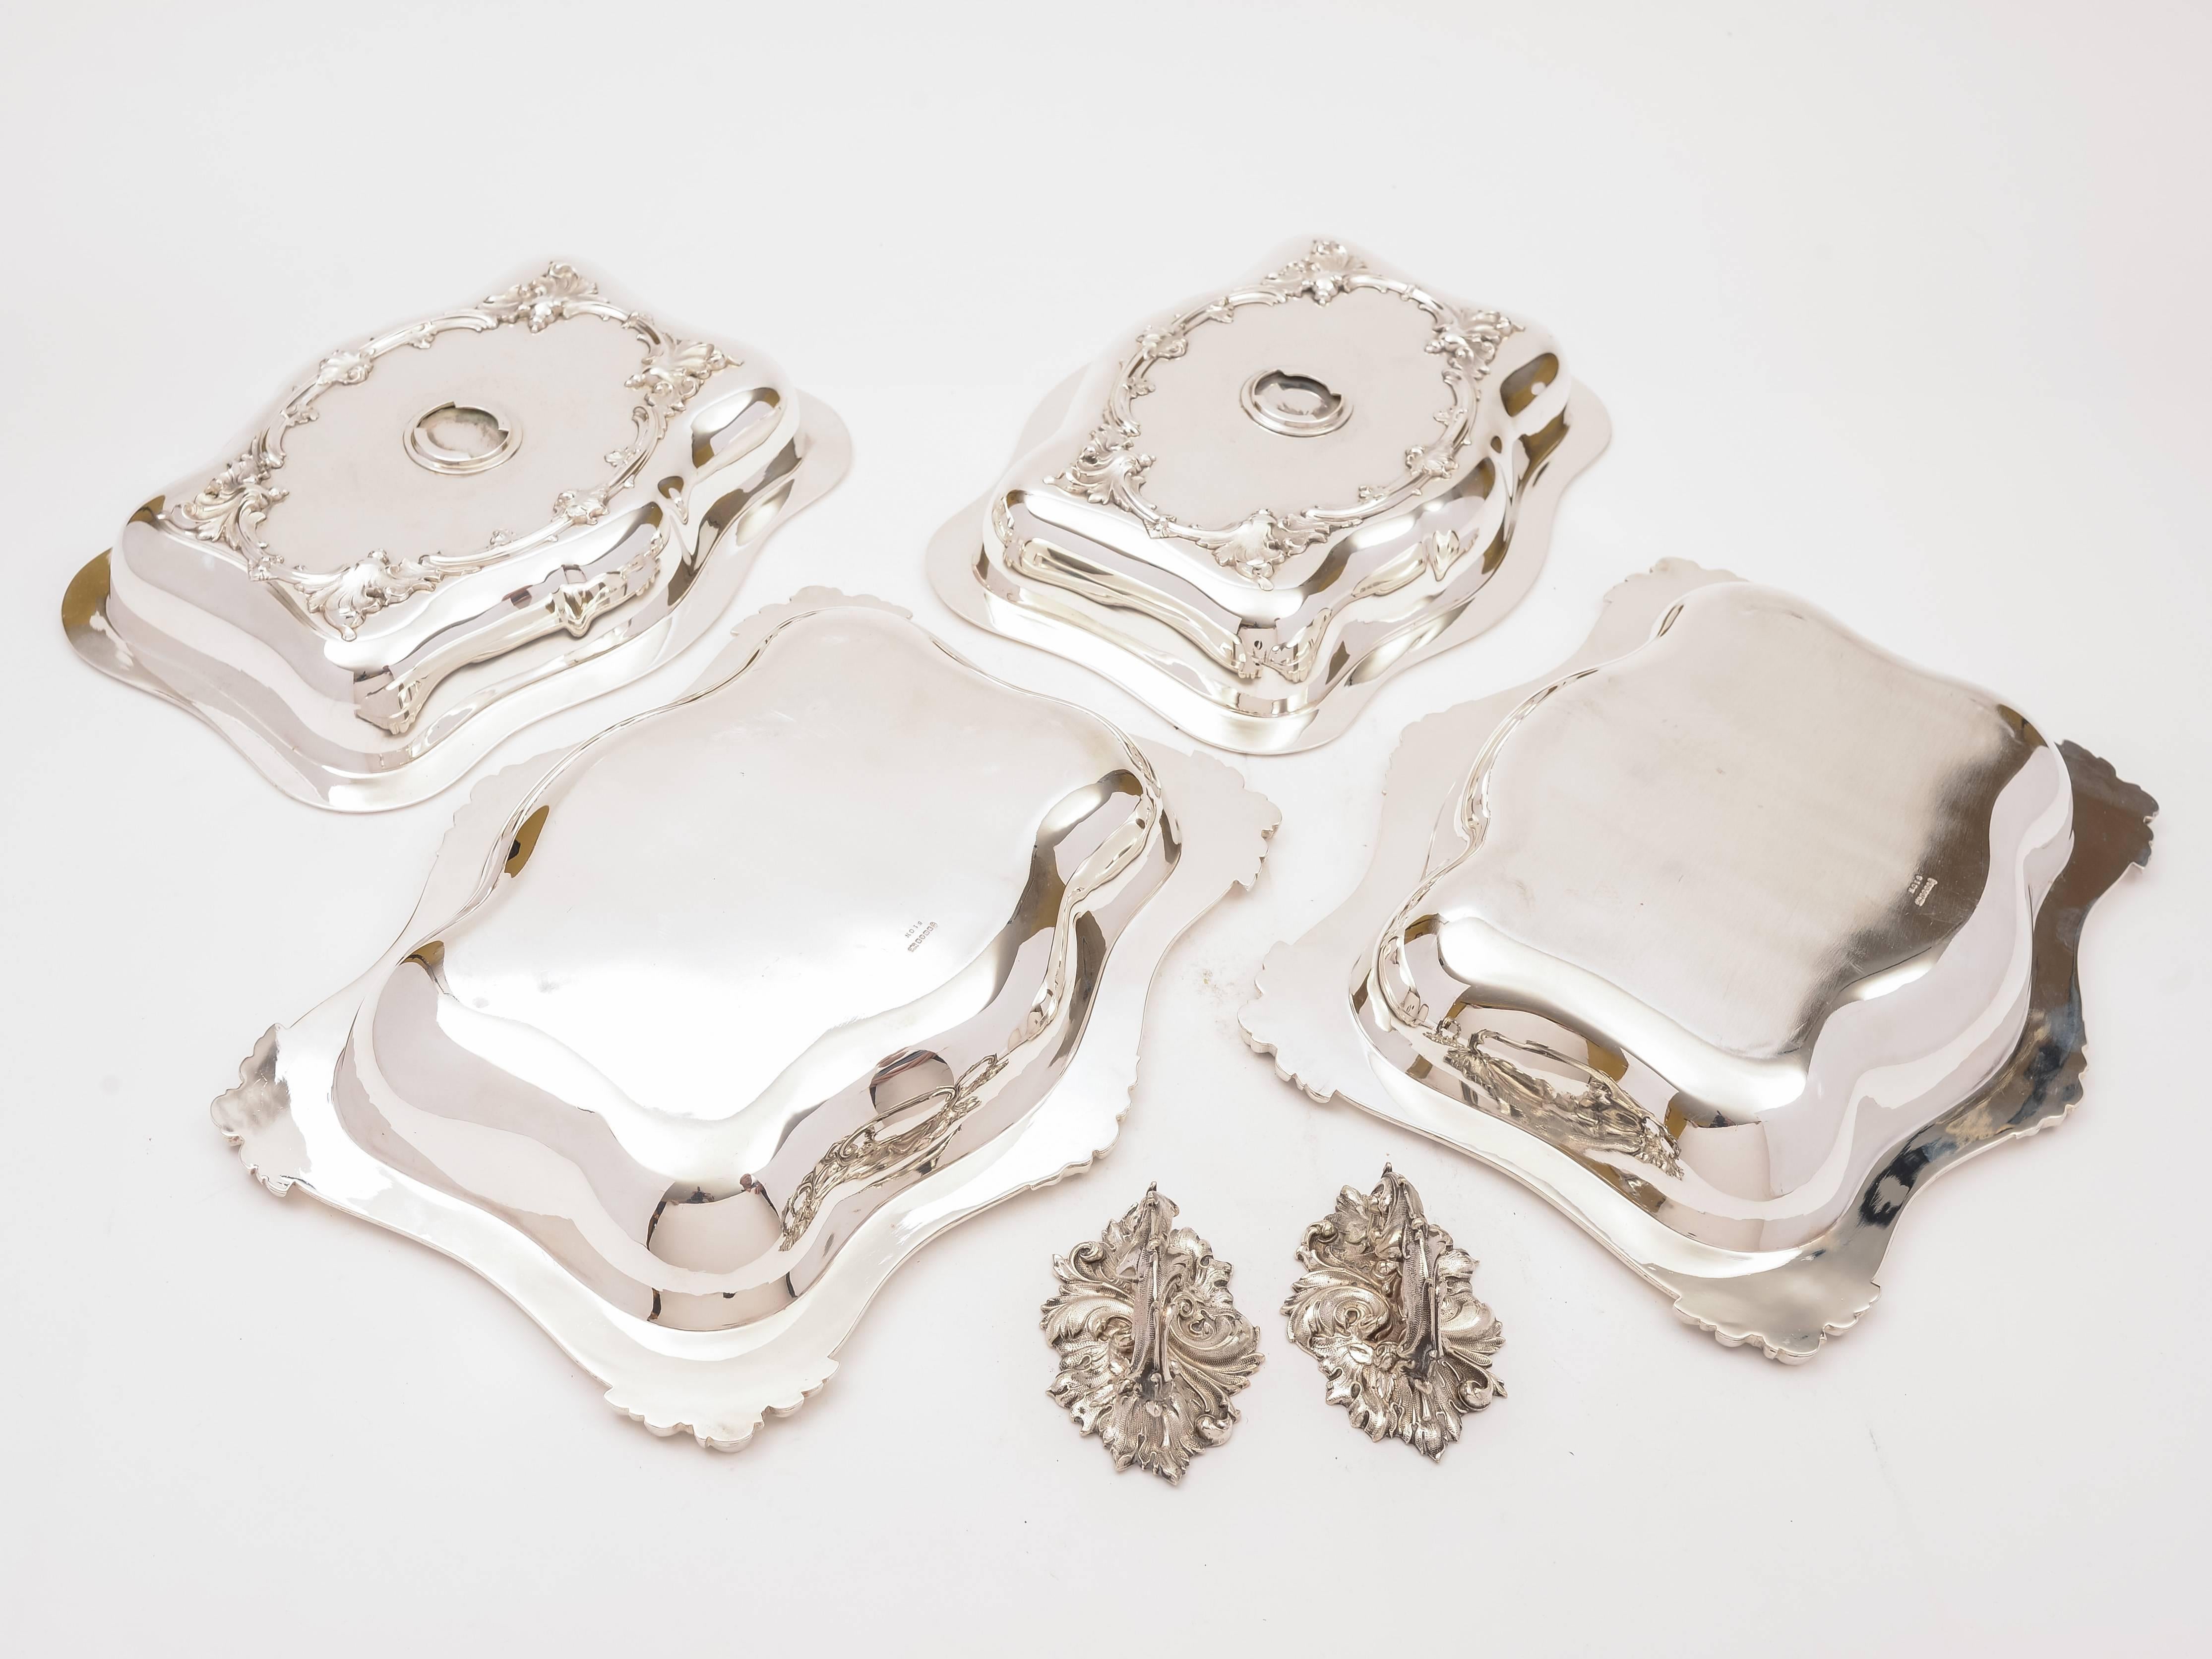 Great Britain (UK) Pair of 19th Century Victorian Silver Plated Entree Dishes, circa 1890